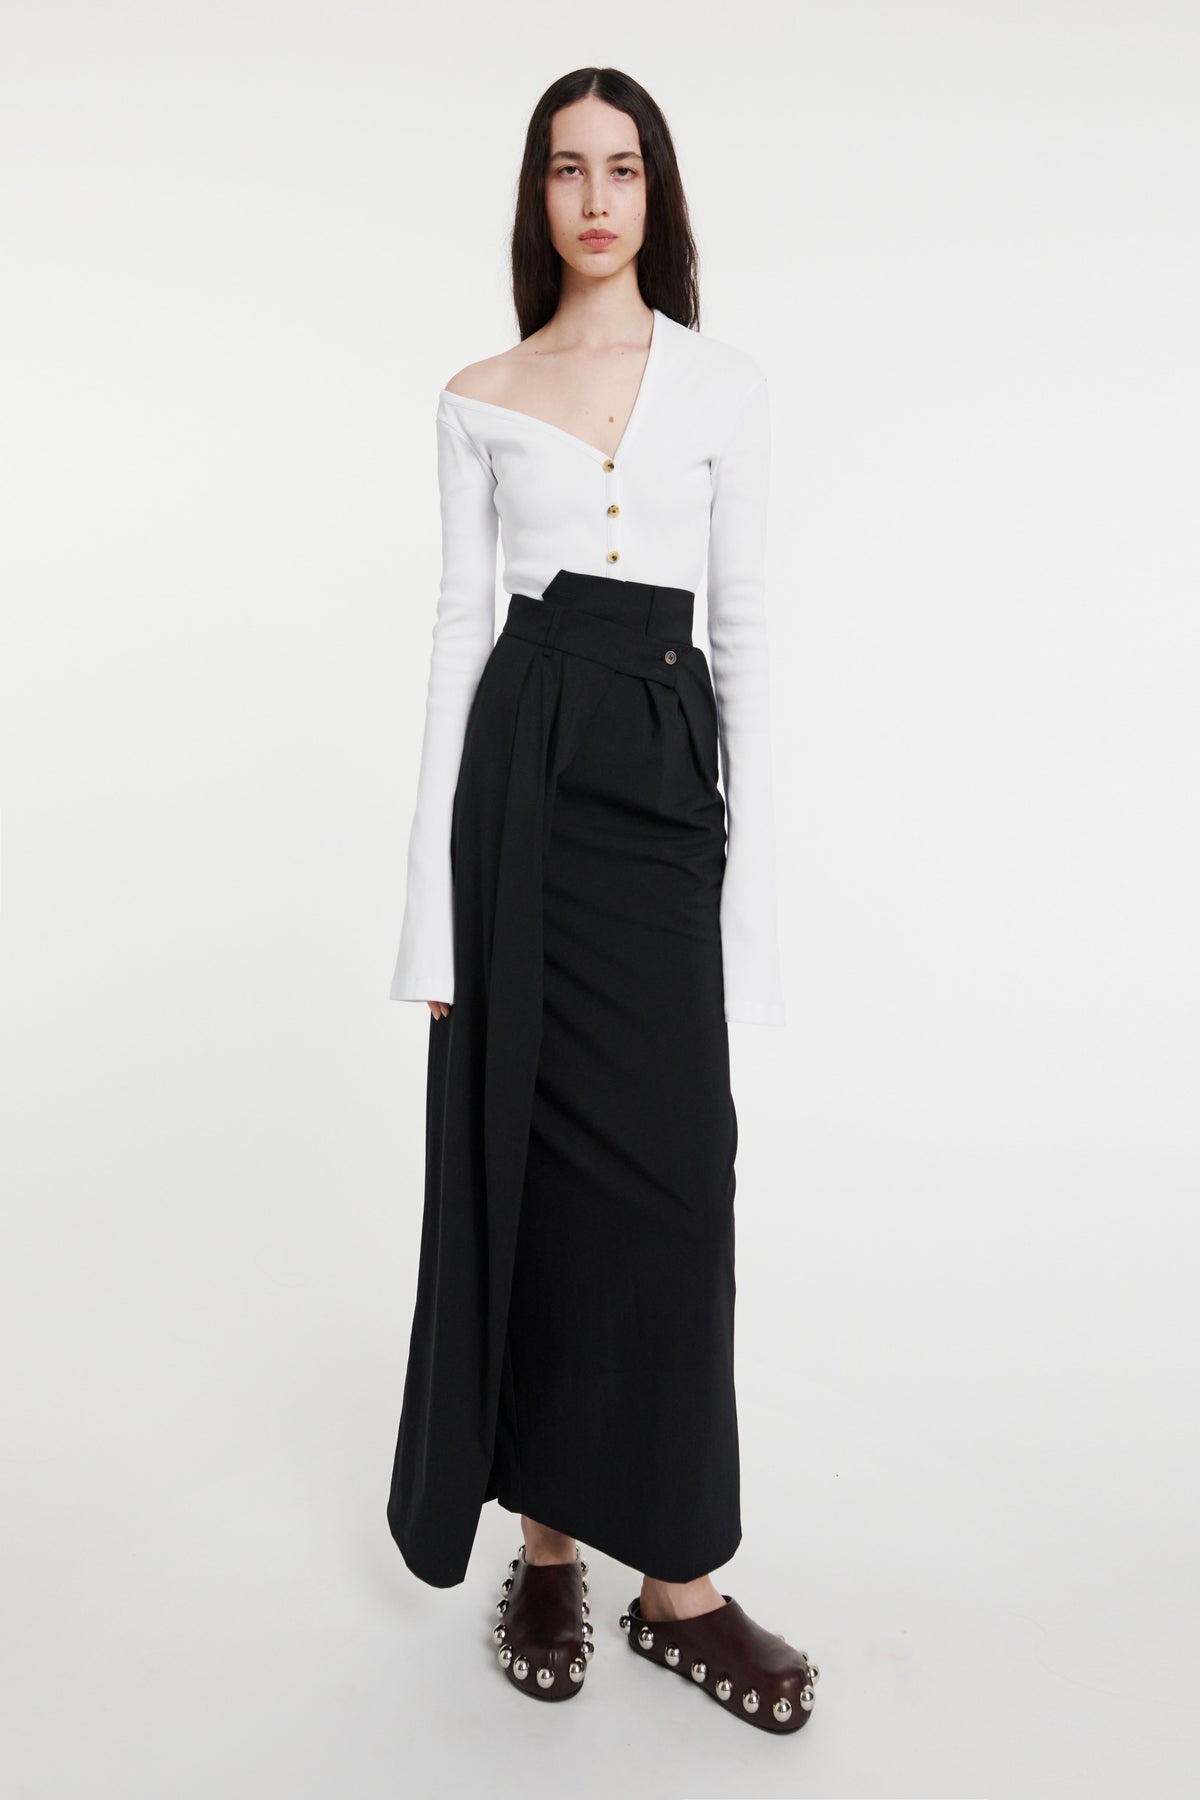 DECONSTRUCTED TROUSERS SKIRT BLACK - 2